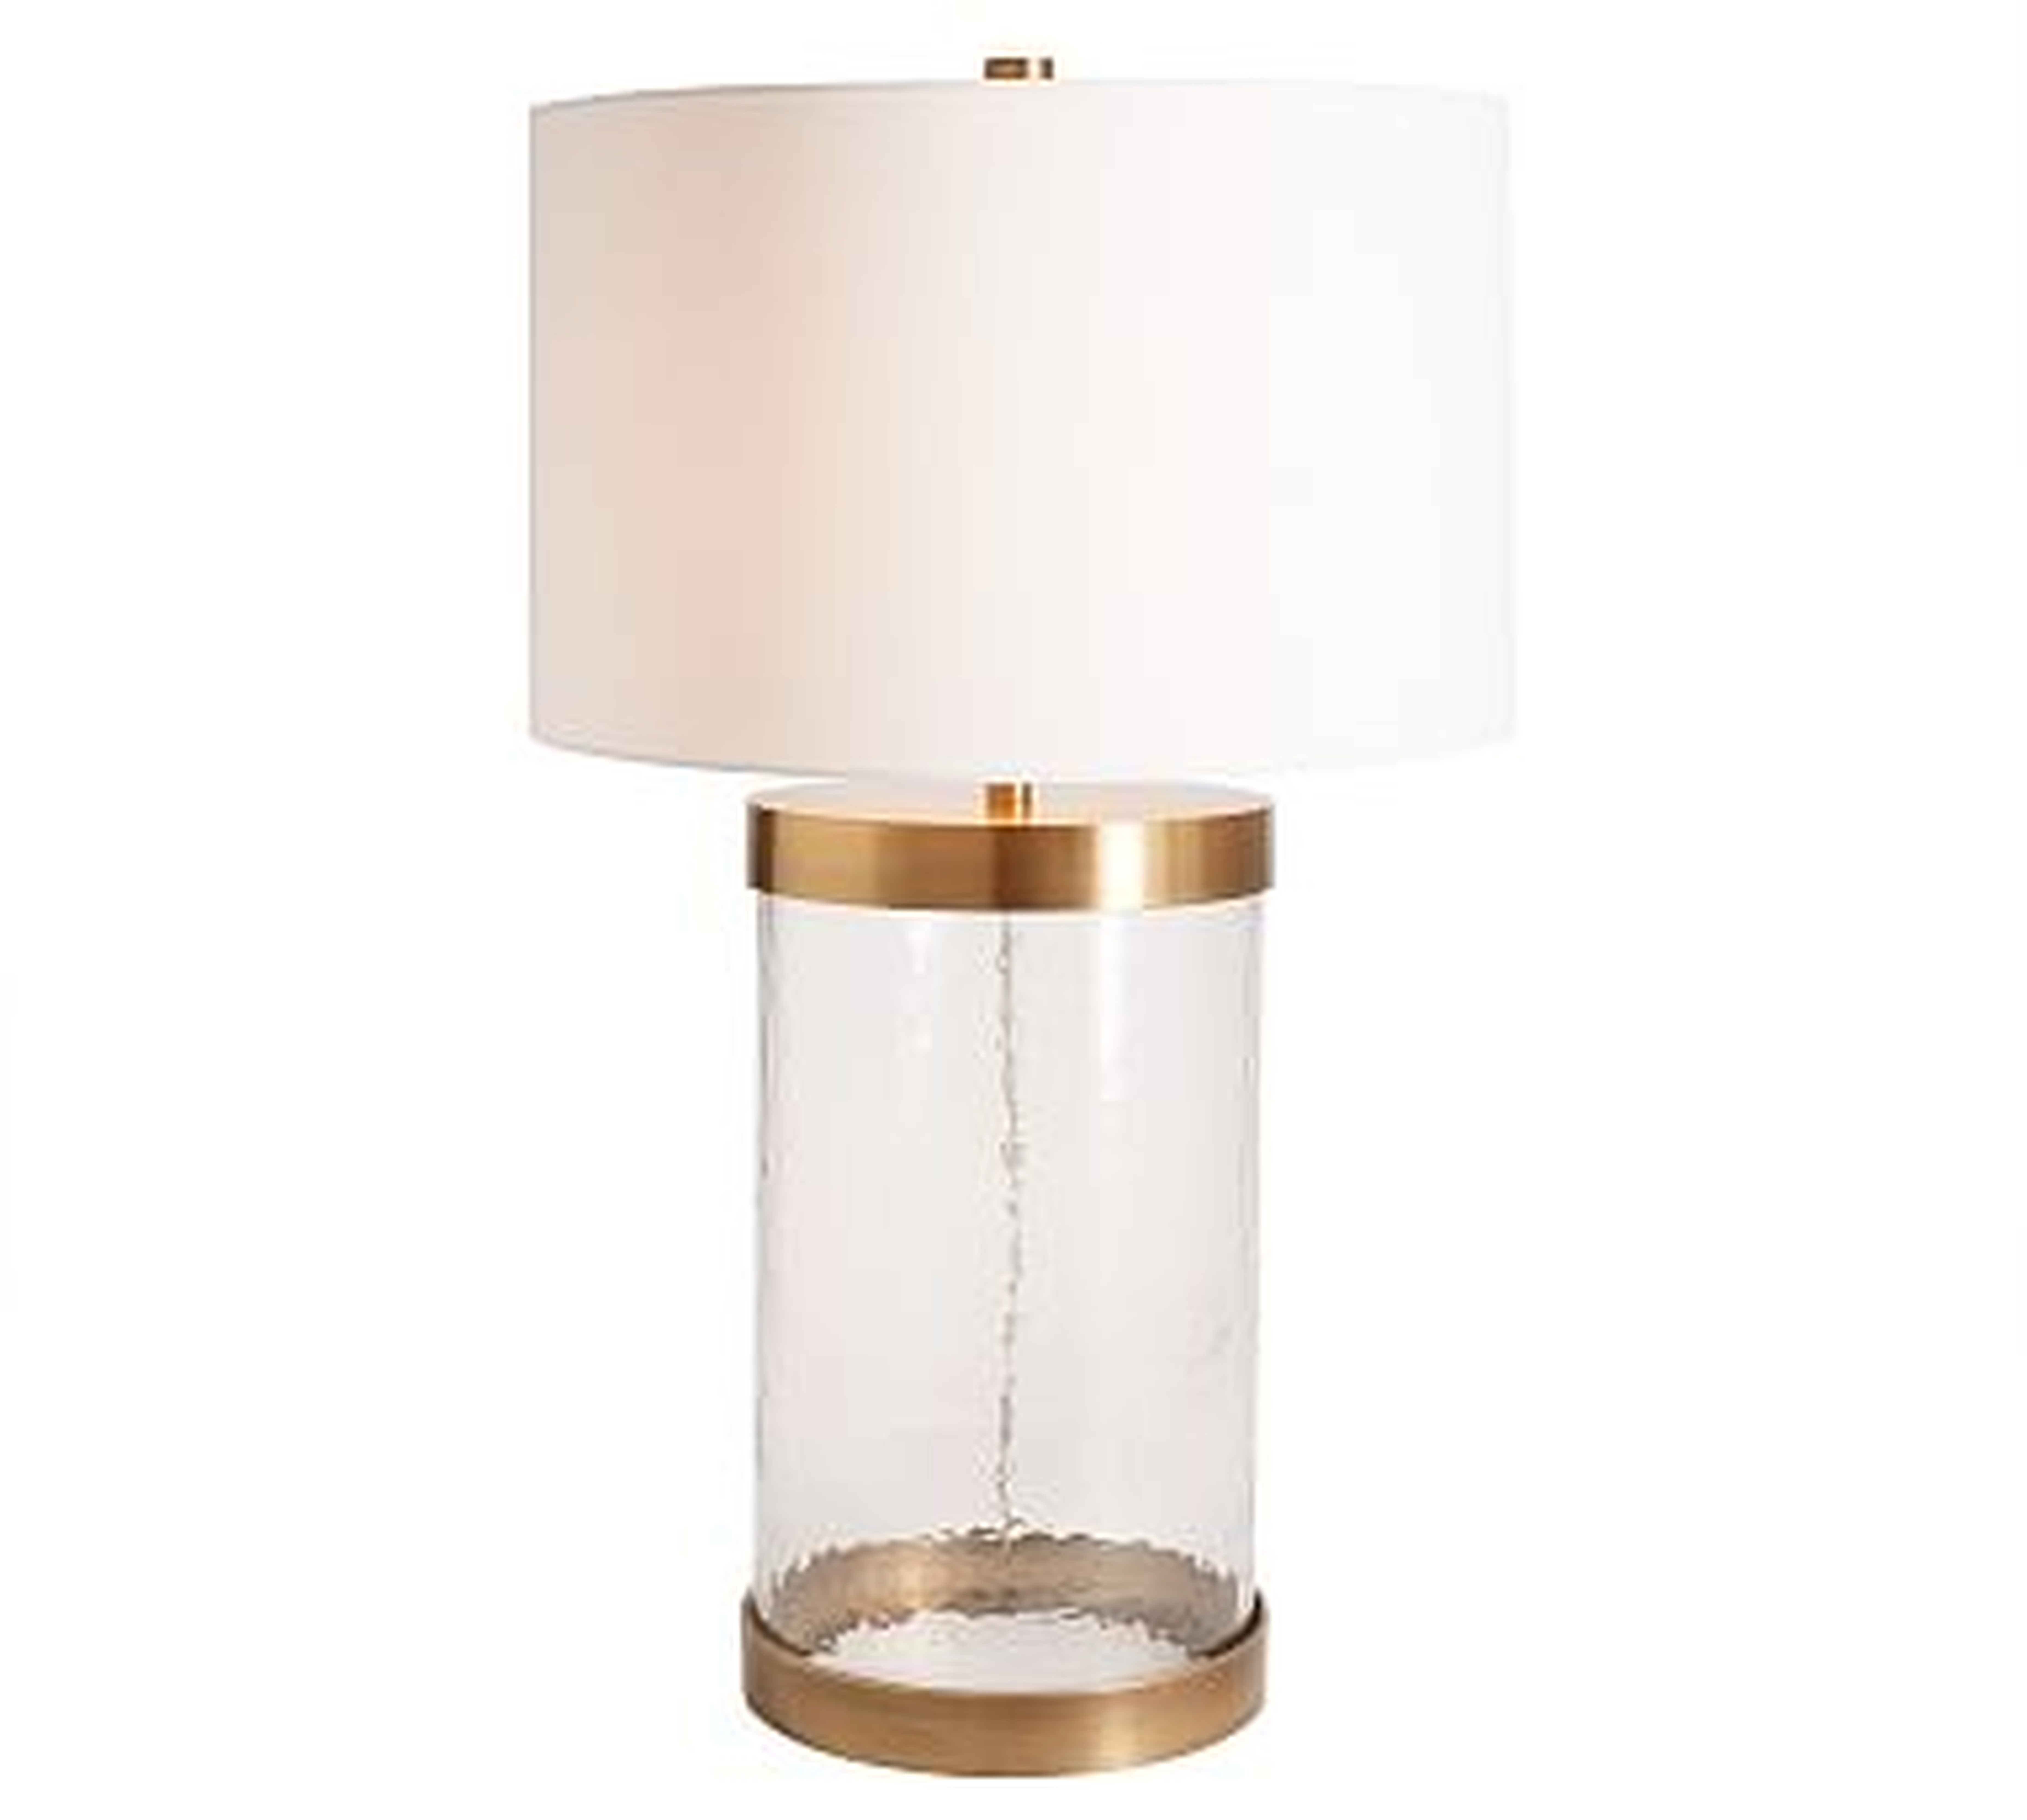 Murano Glass 31" Table Lamp &amp; X-Large Straight Sided Gallery Shade, Antique Brass Base/White Shade - Pottery Barn